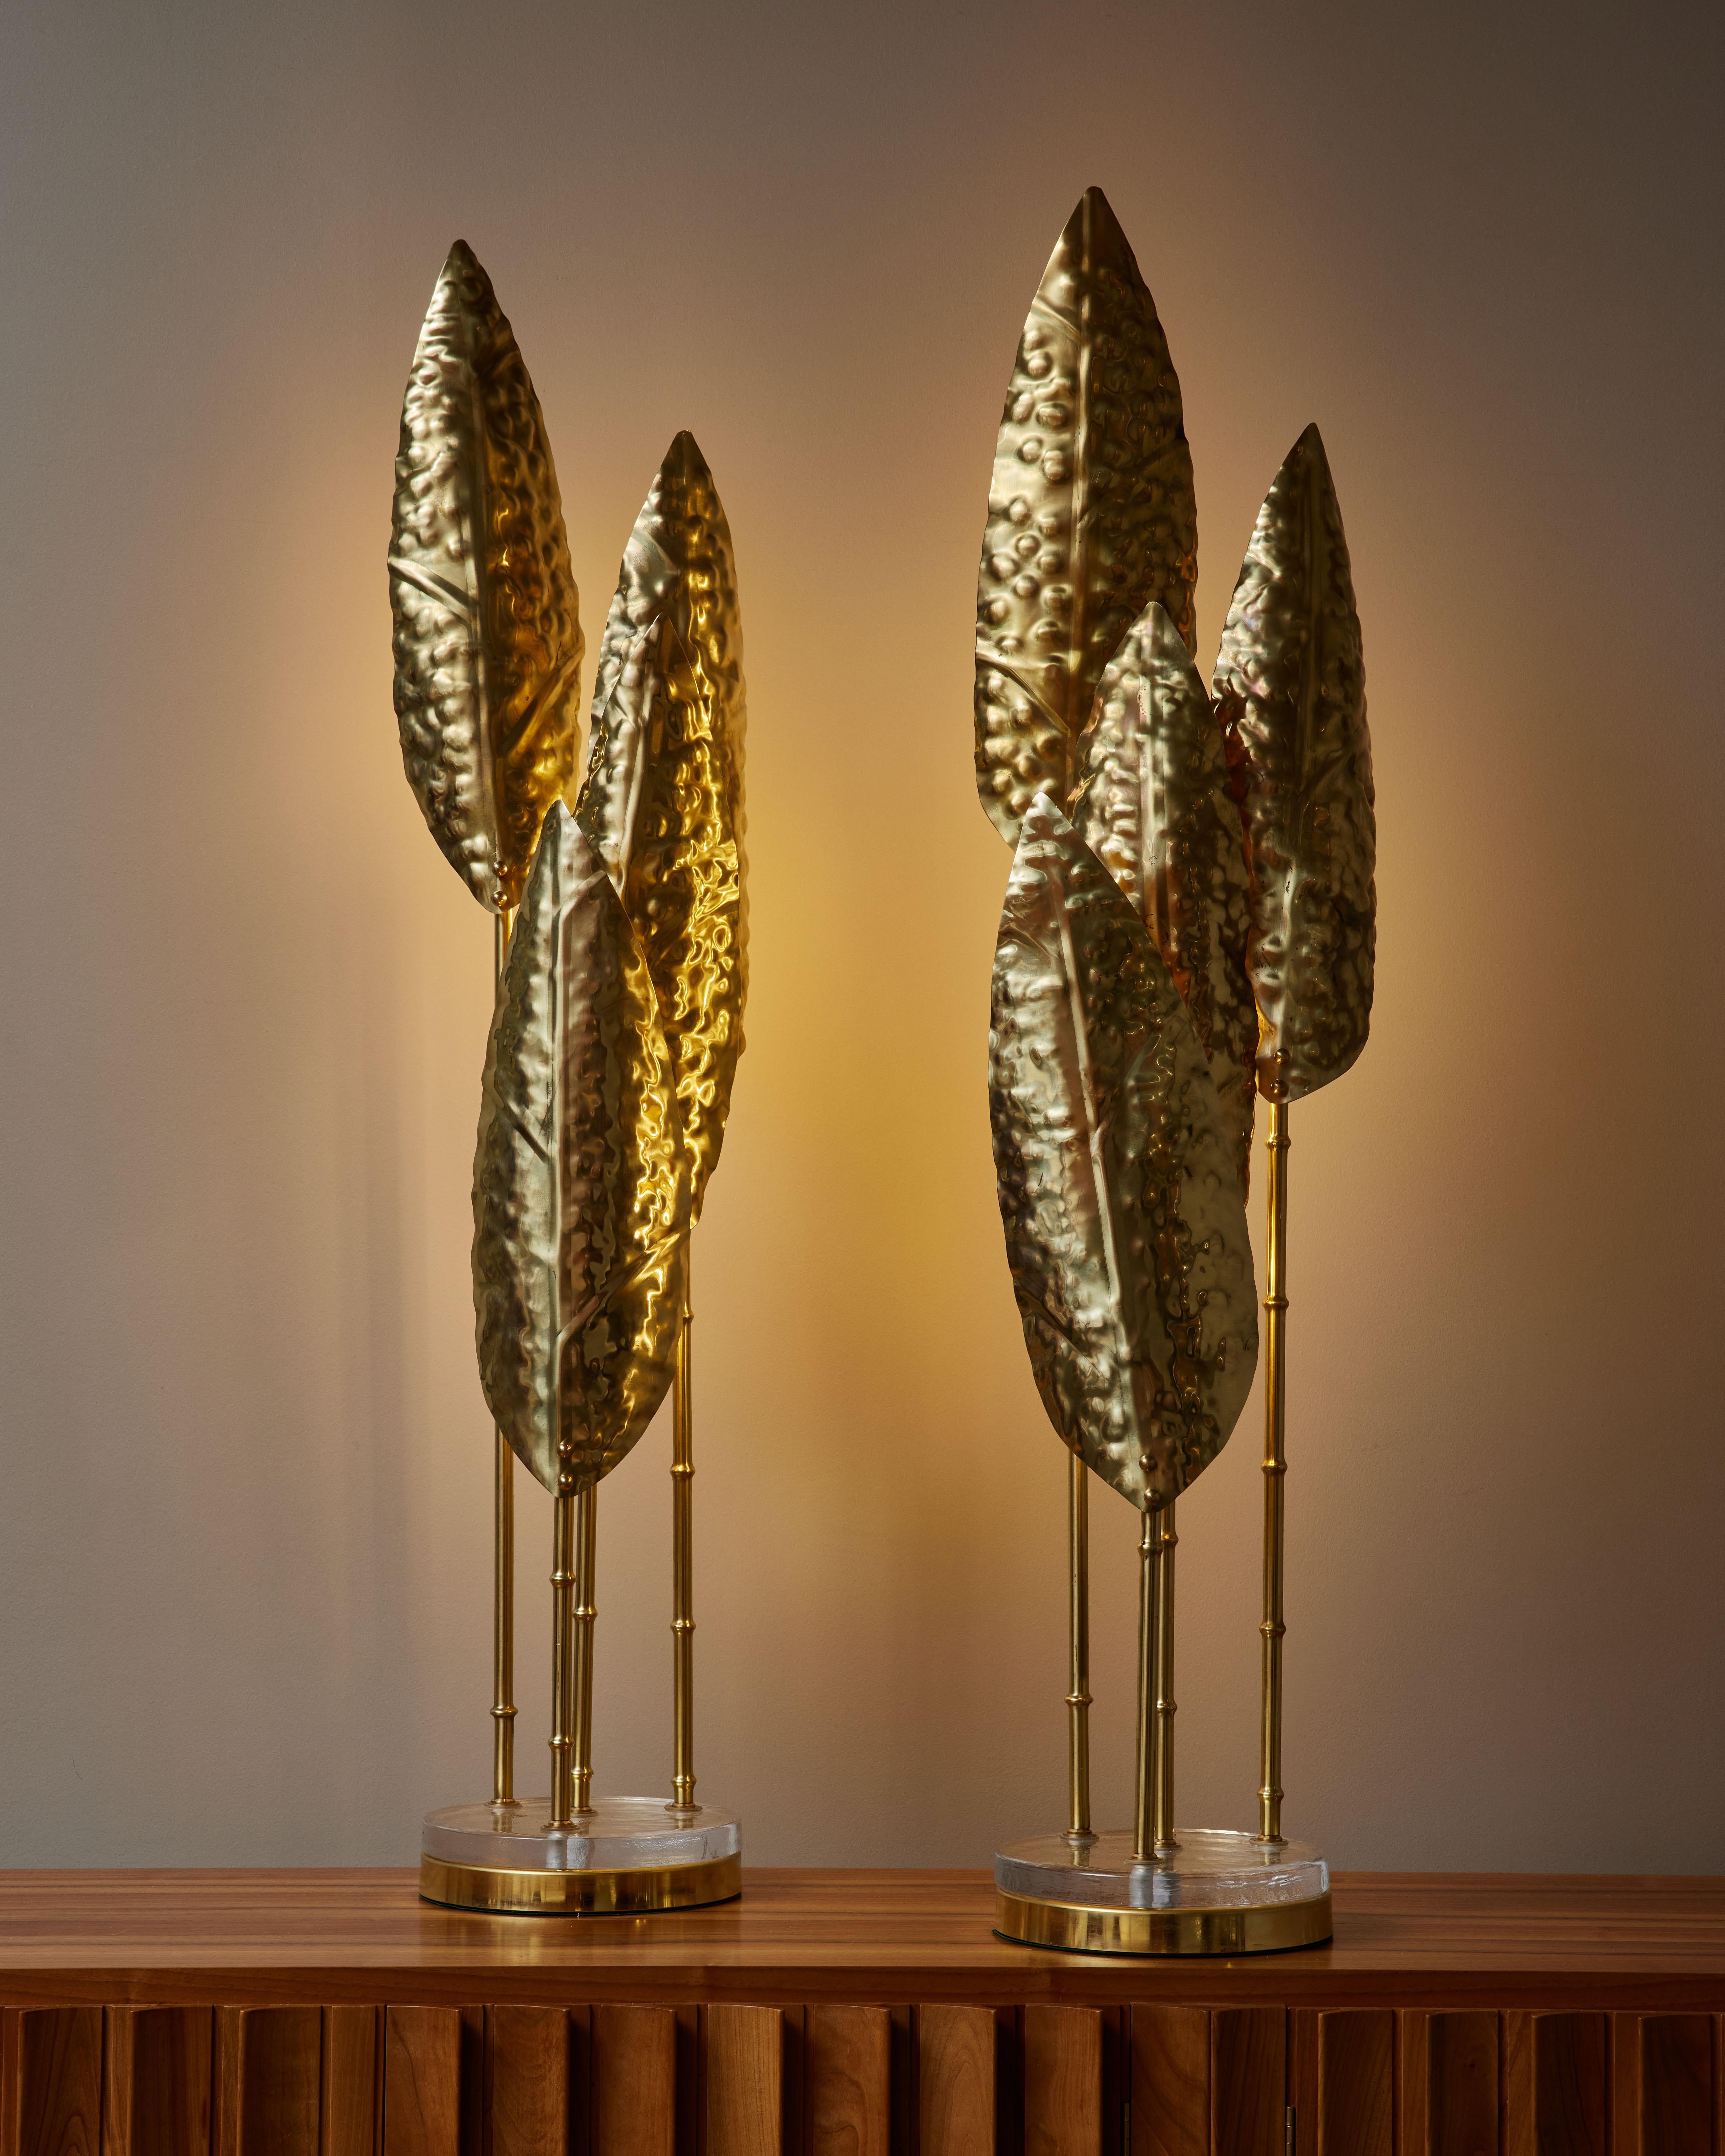 Pair of decorative floor lamps made of a round brass and clear glass foot, four bamboo shaped stems and elongated leaves each hiding one source of light.